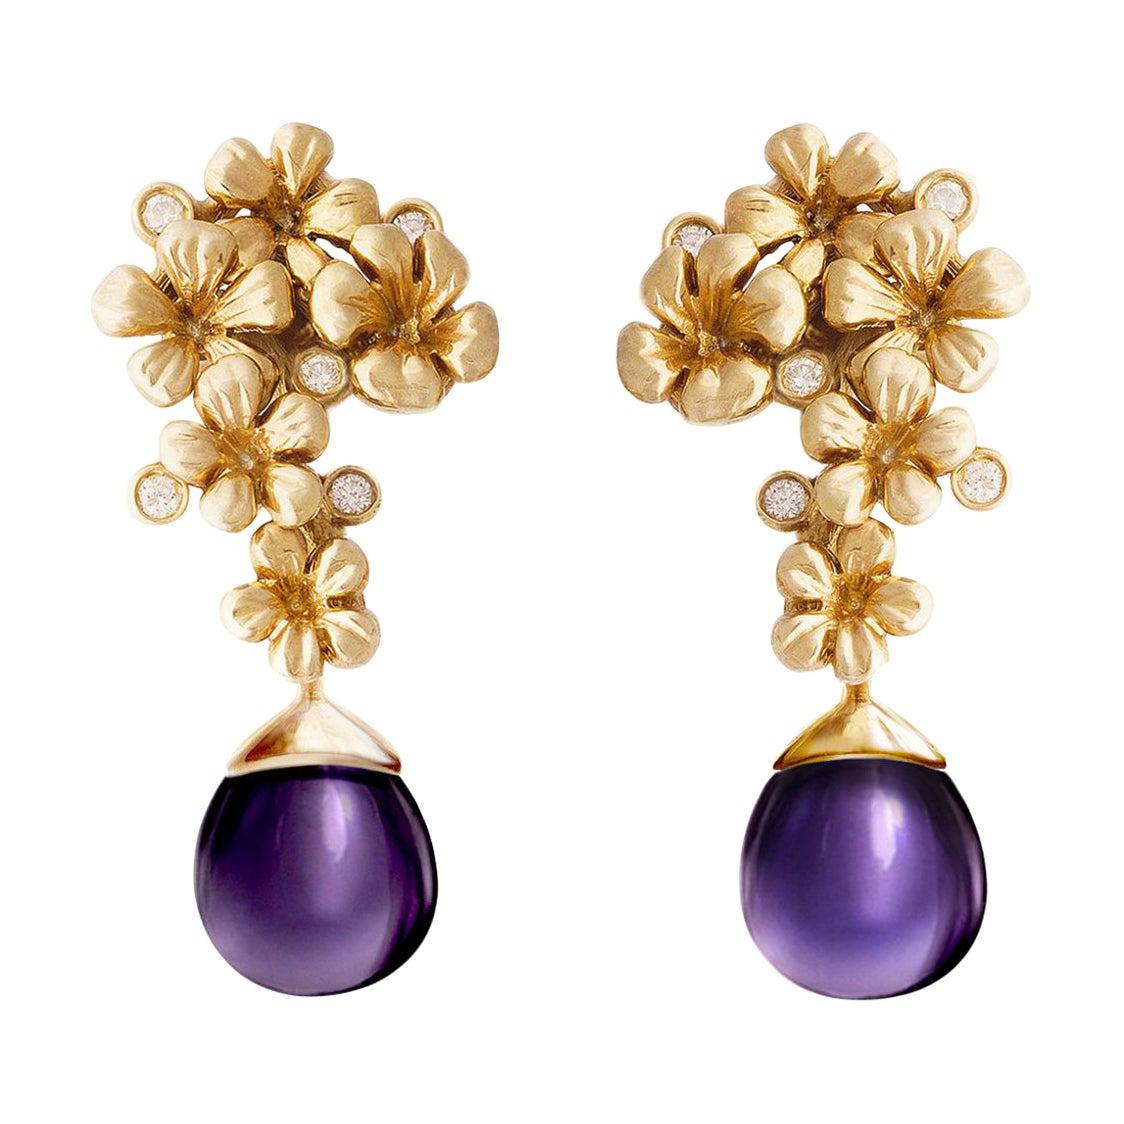 Floral Contemporary Earrings in Eighteen Karat Gold with Natural Round Diamonds